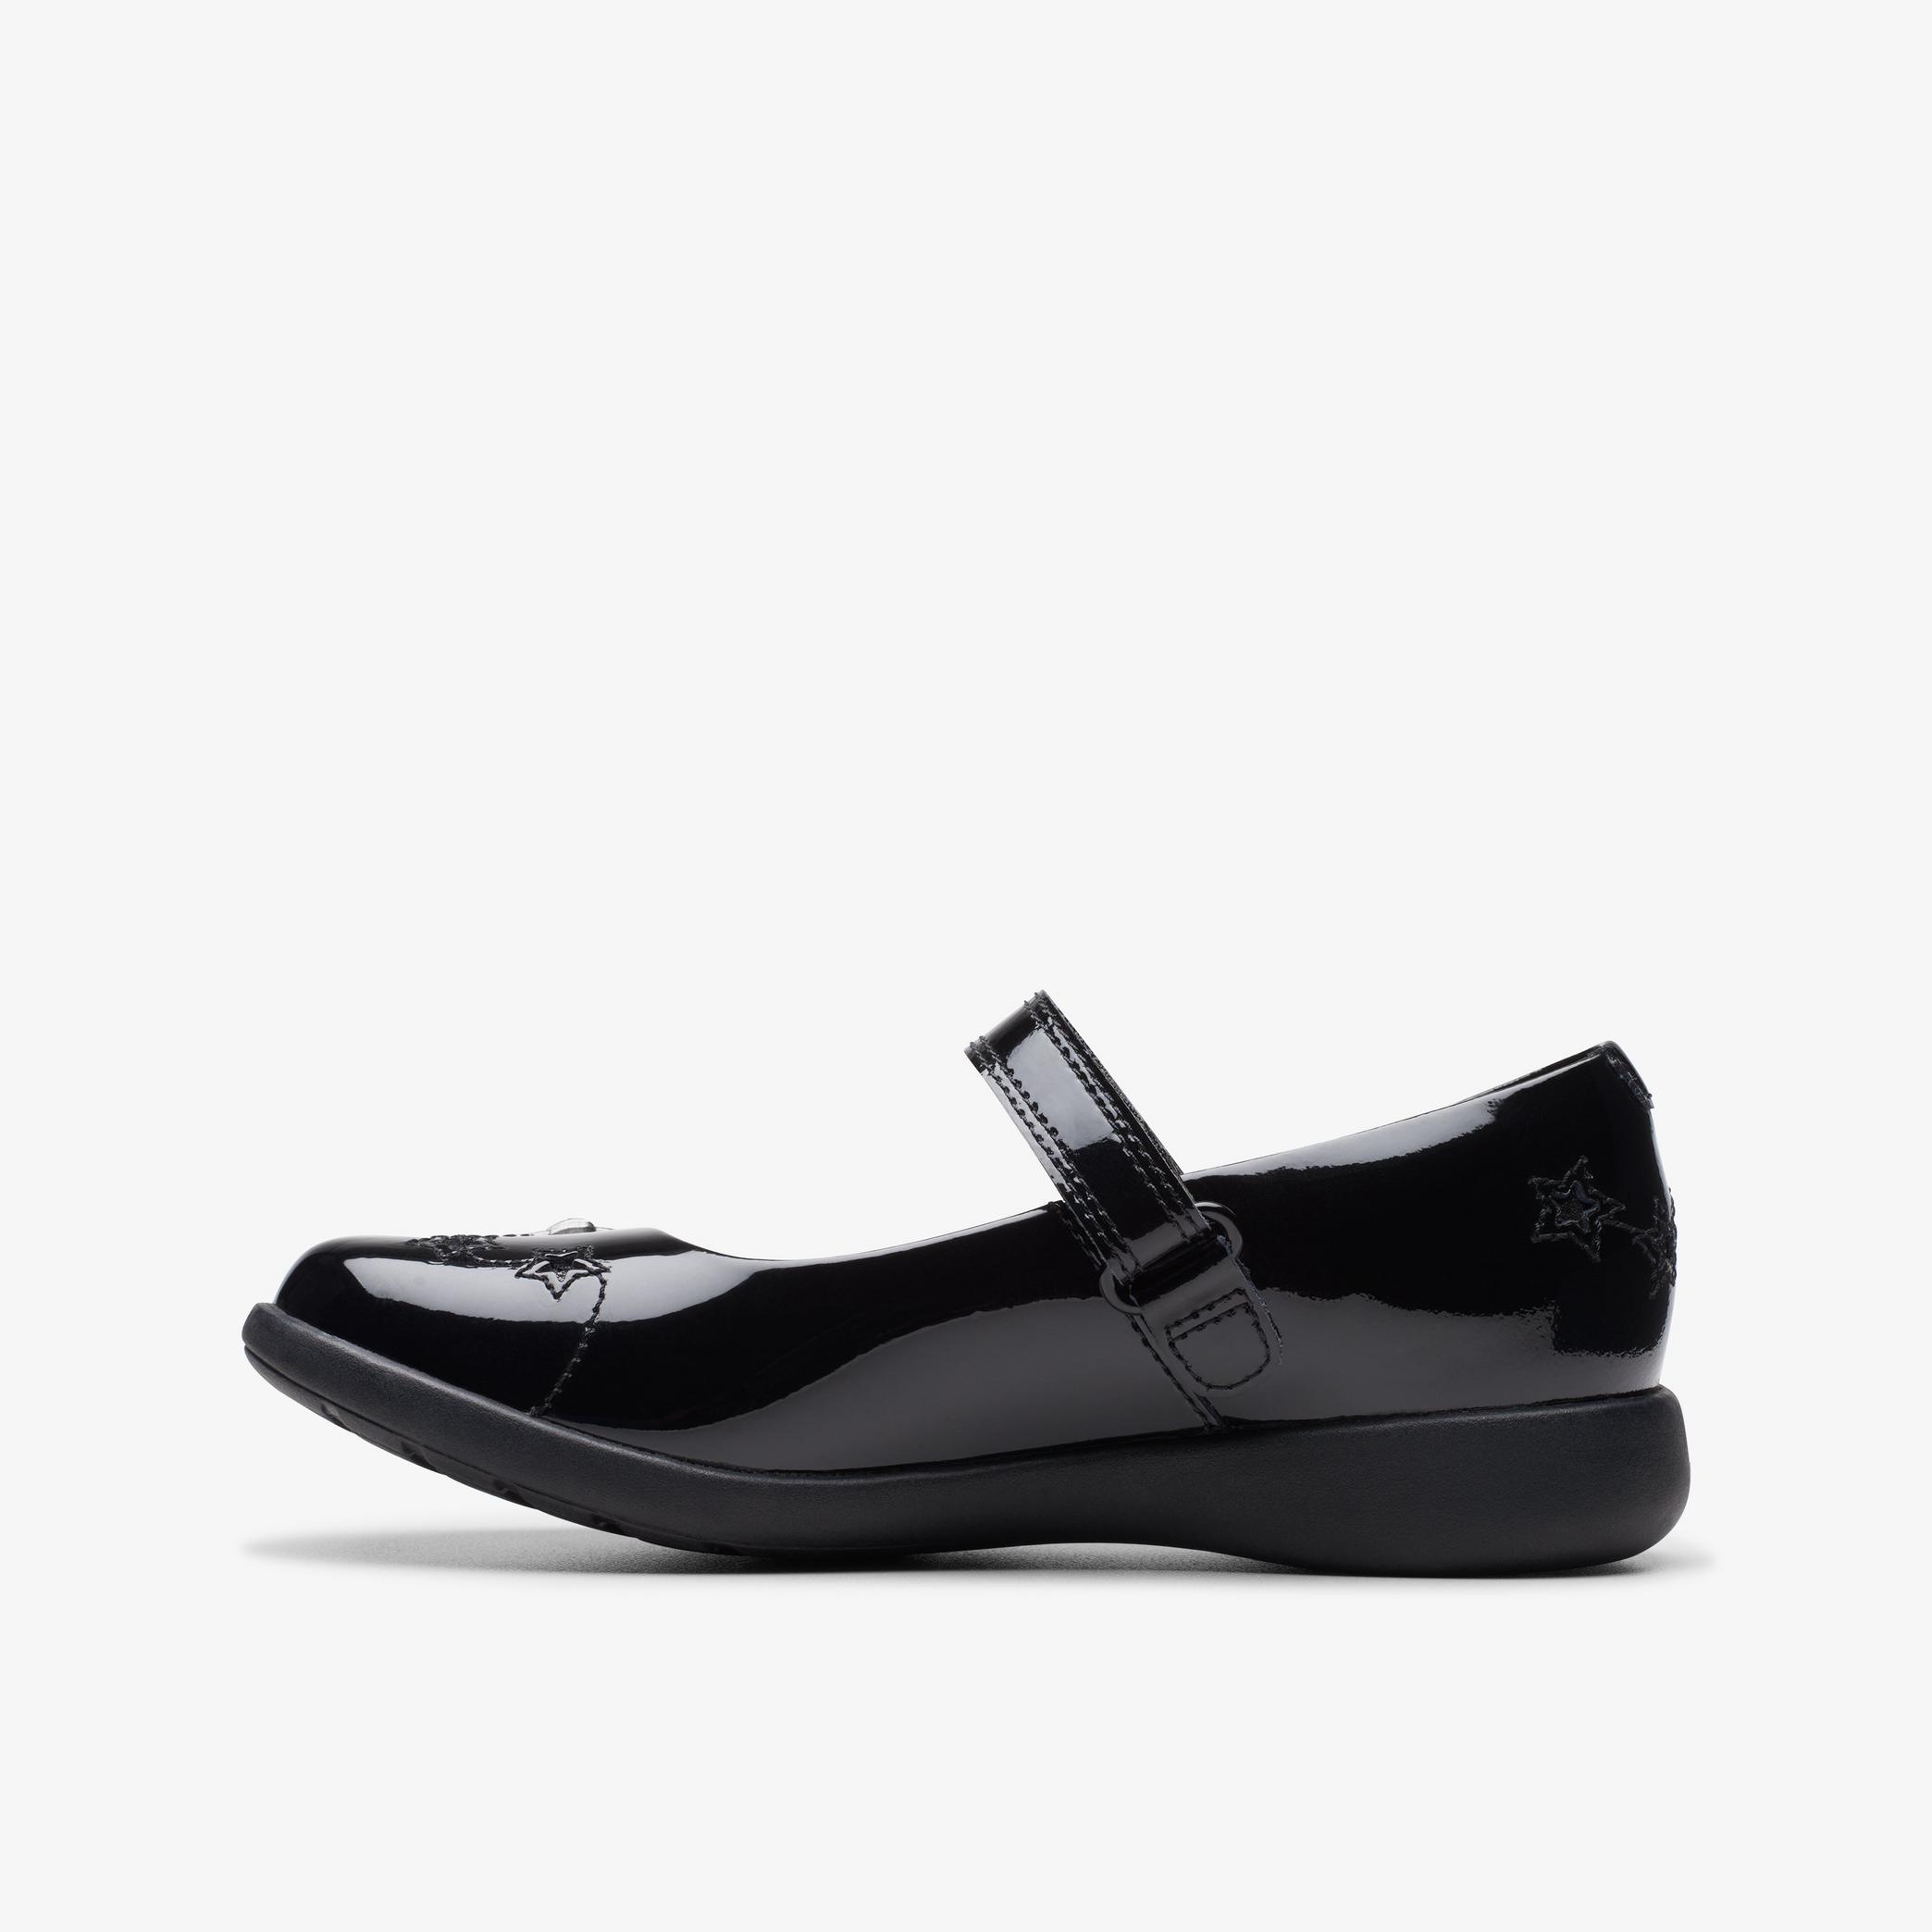 GIRLS Etch Space Kid Black Patent Mary Jane Shoes | Clarks UK